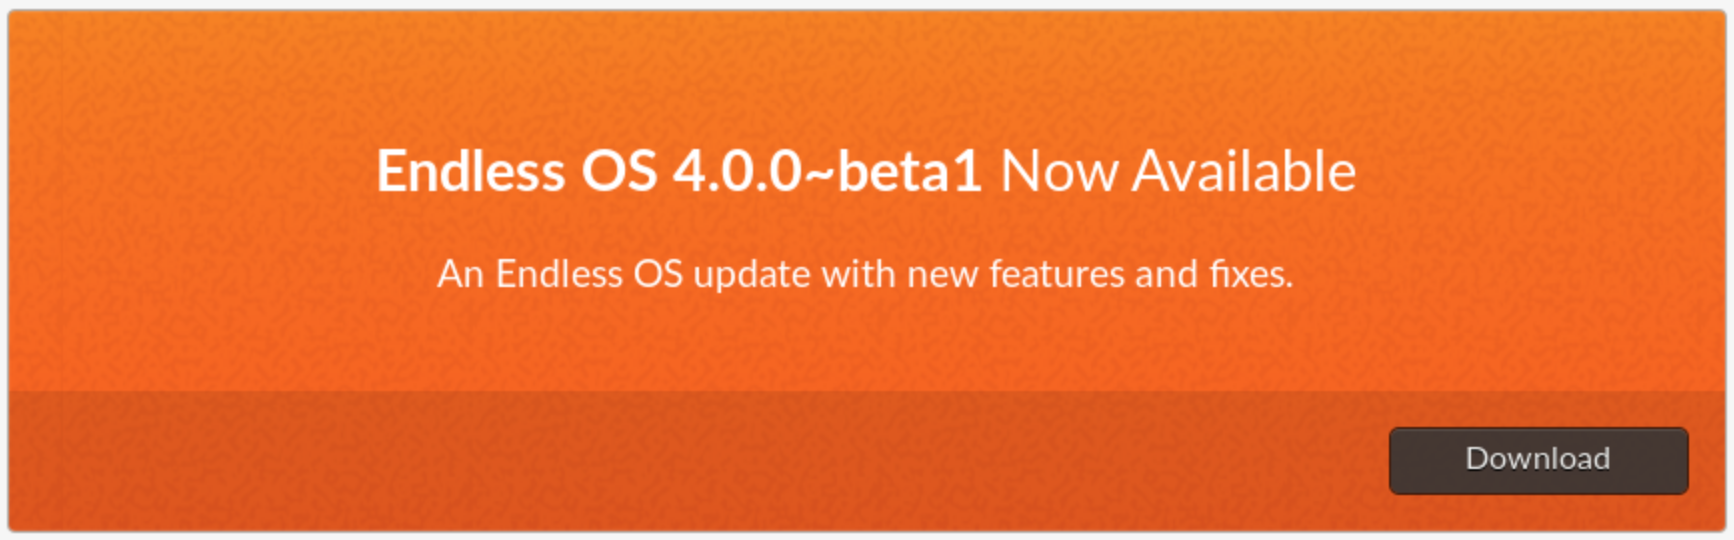 eos_4.0.0-beta1_available.png